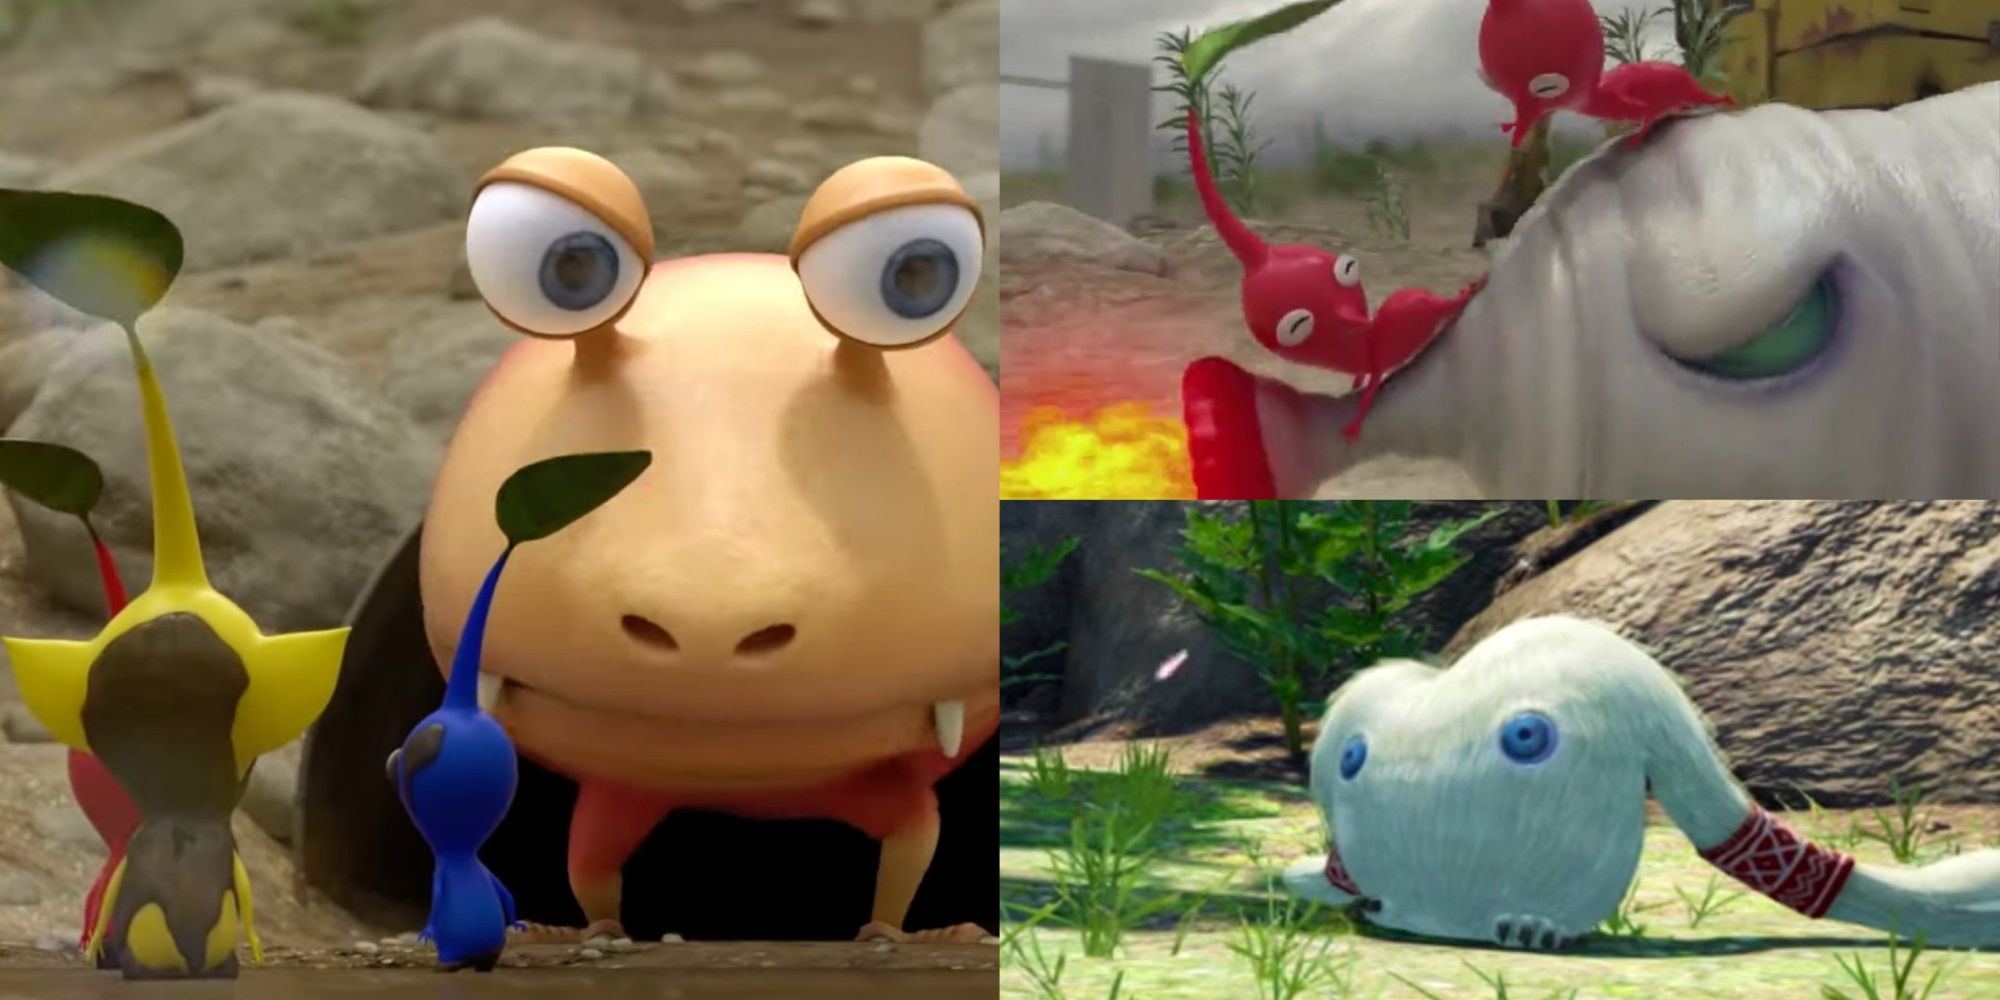 Spotted Bulborb left, Fiery Blowhog Top Right, Mamuta Bottom Right